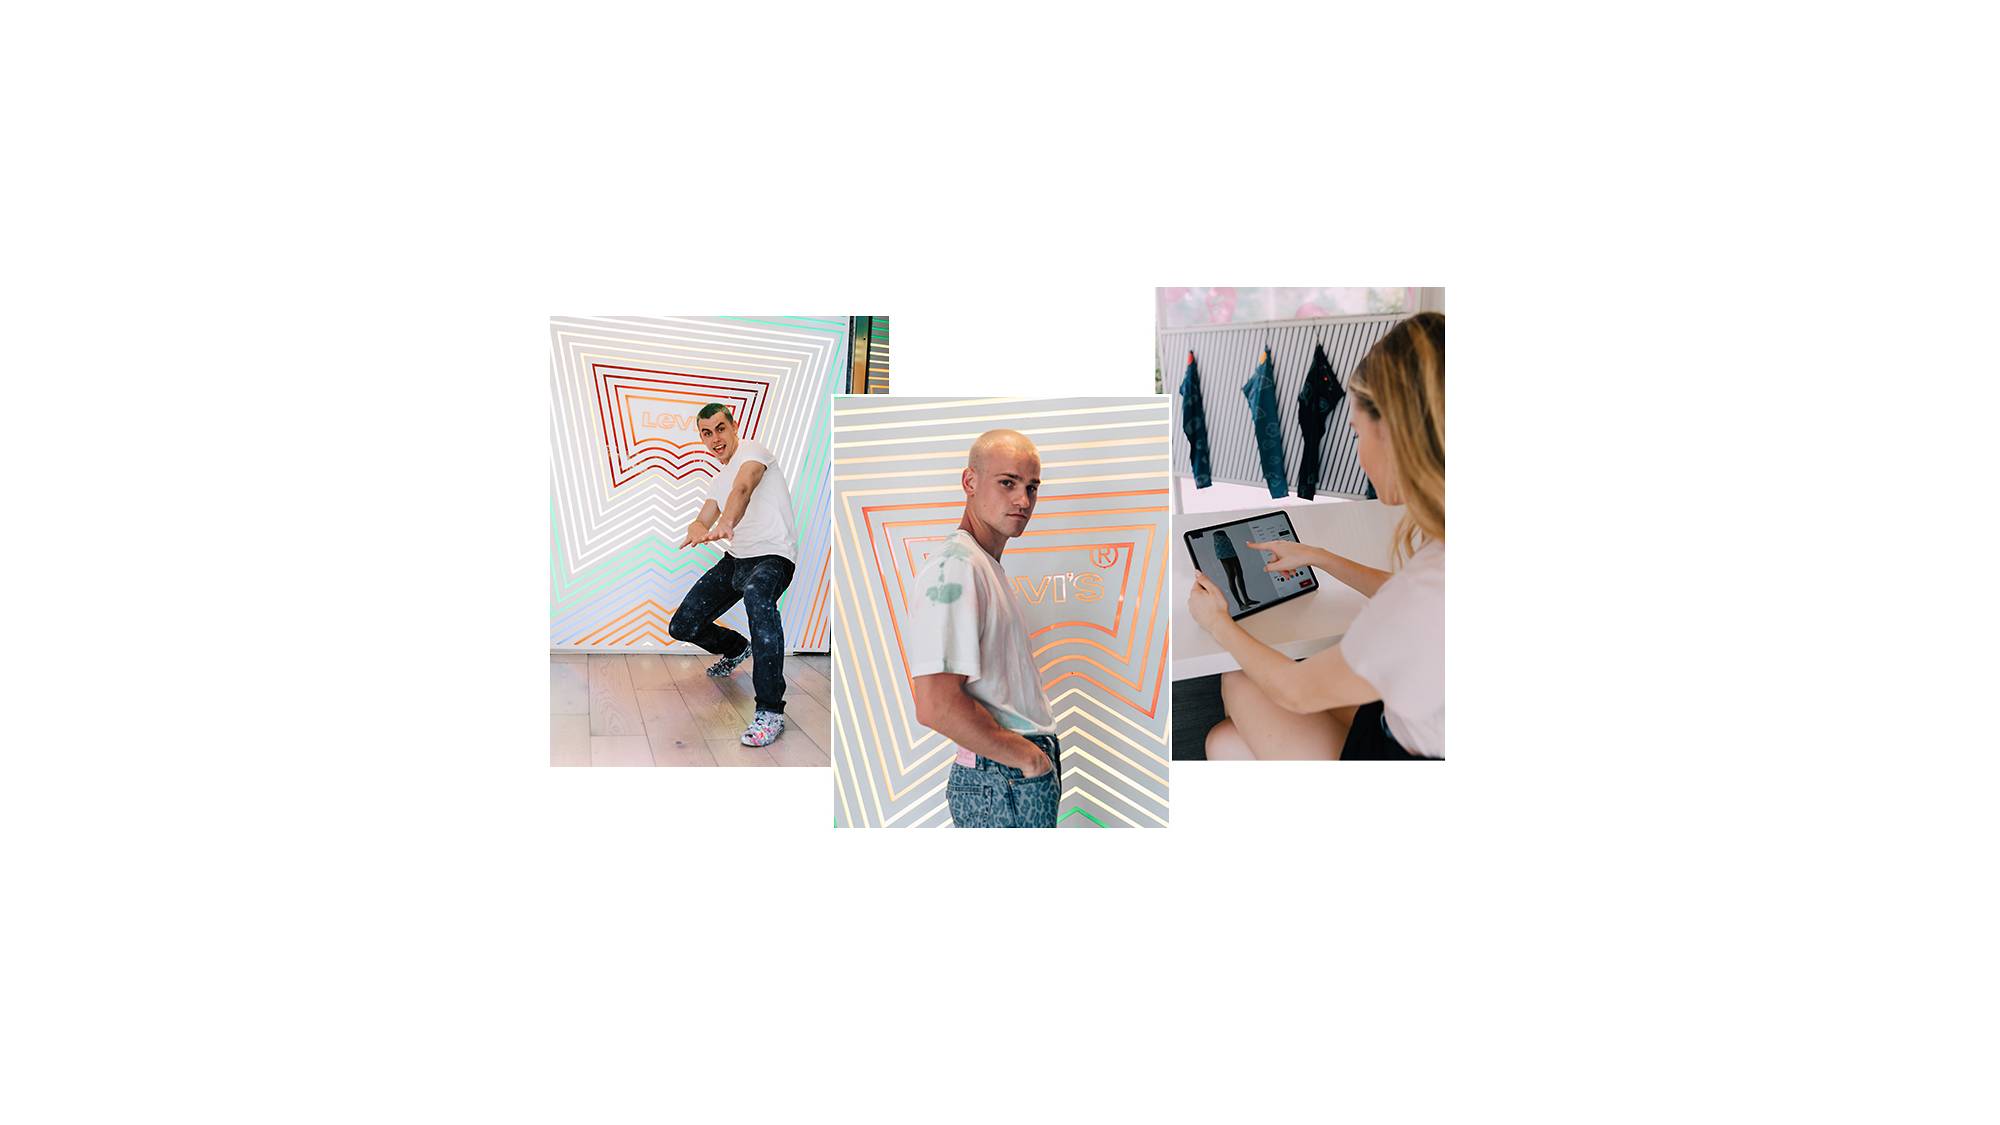 Three images of TikTokers - the left image is of Callen Schaub, the middle image is of Everett Williams individually standing in front of a neon Levi's® sign and the image on the right is an image of Cosette using an iPad to design her own Future Finish product.